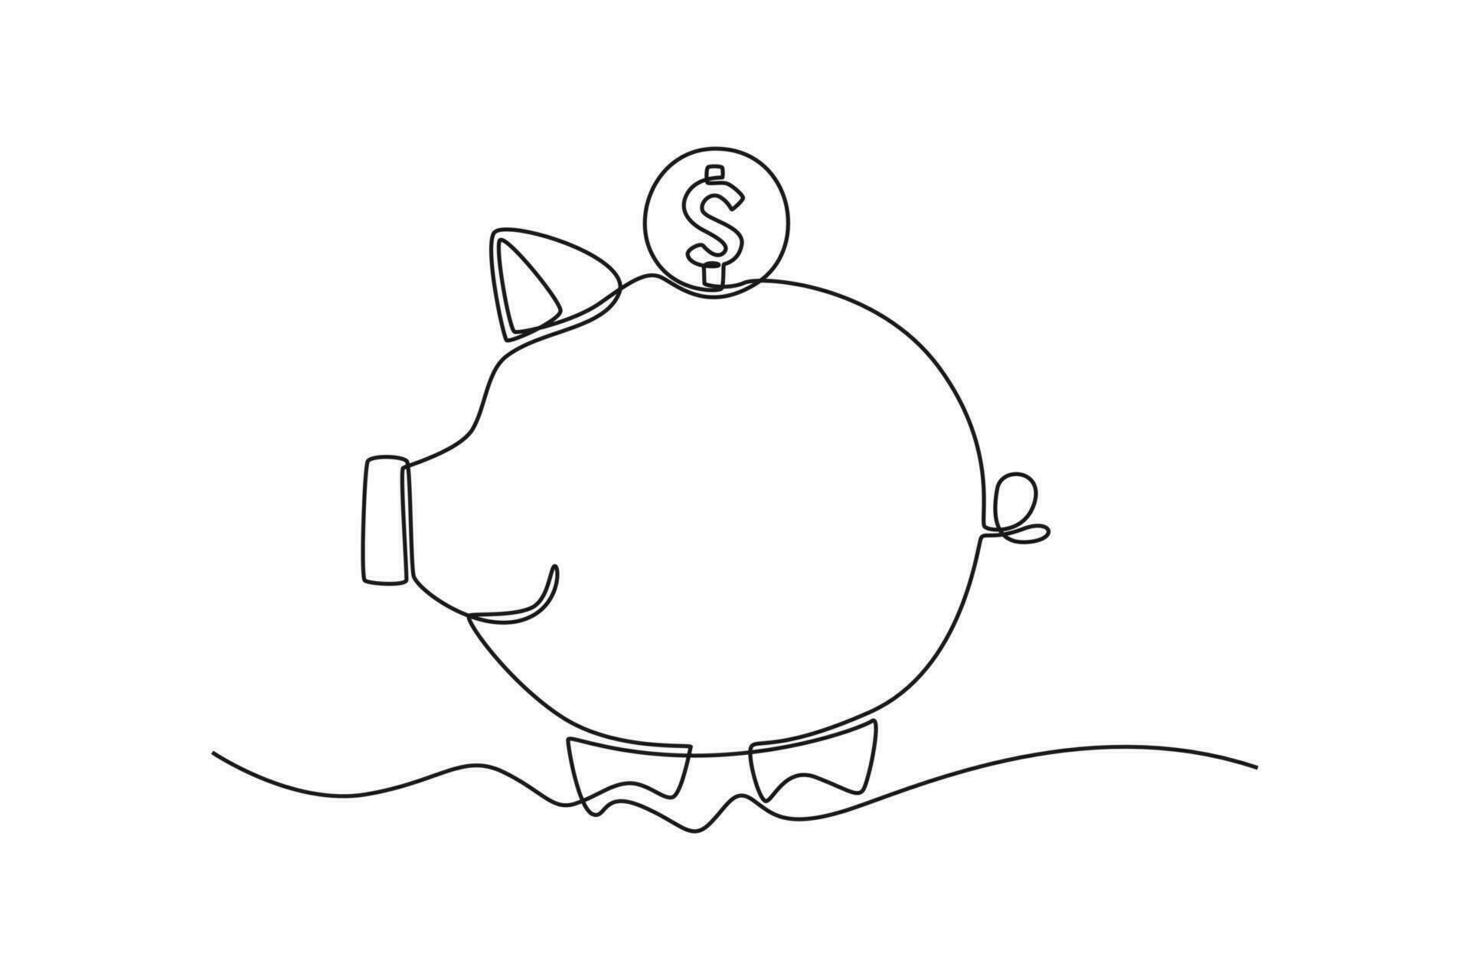 Continuous one line drawing coin on piggy bank. financial literacy concept. Single line draw design vector graphic illustration.